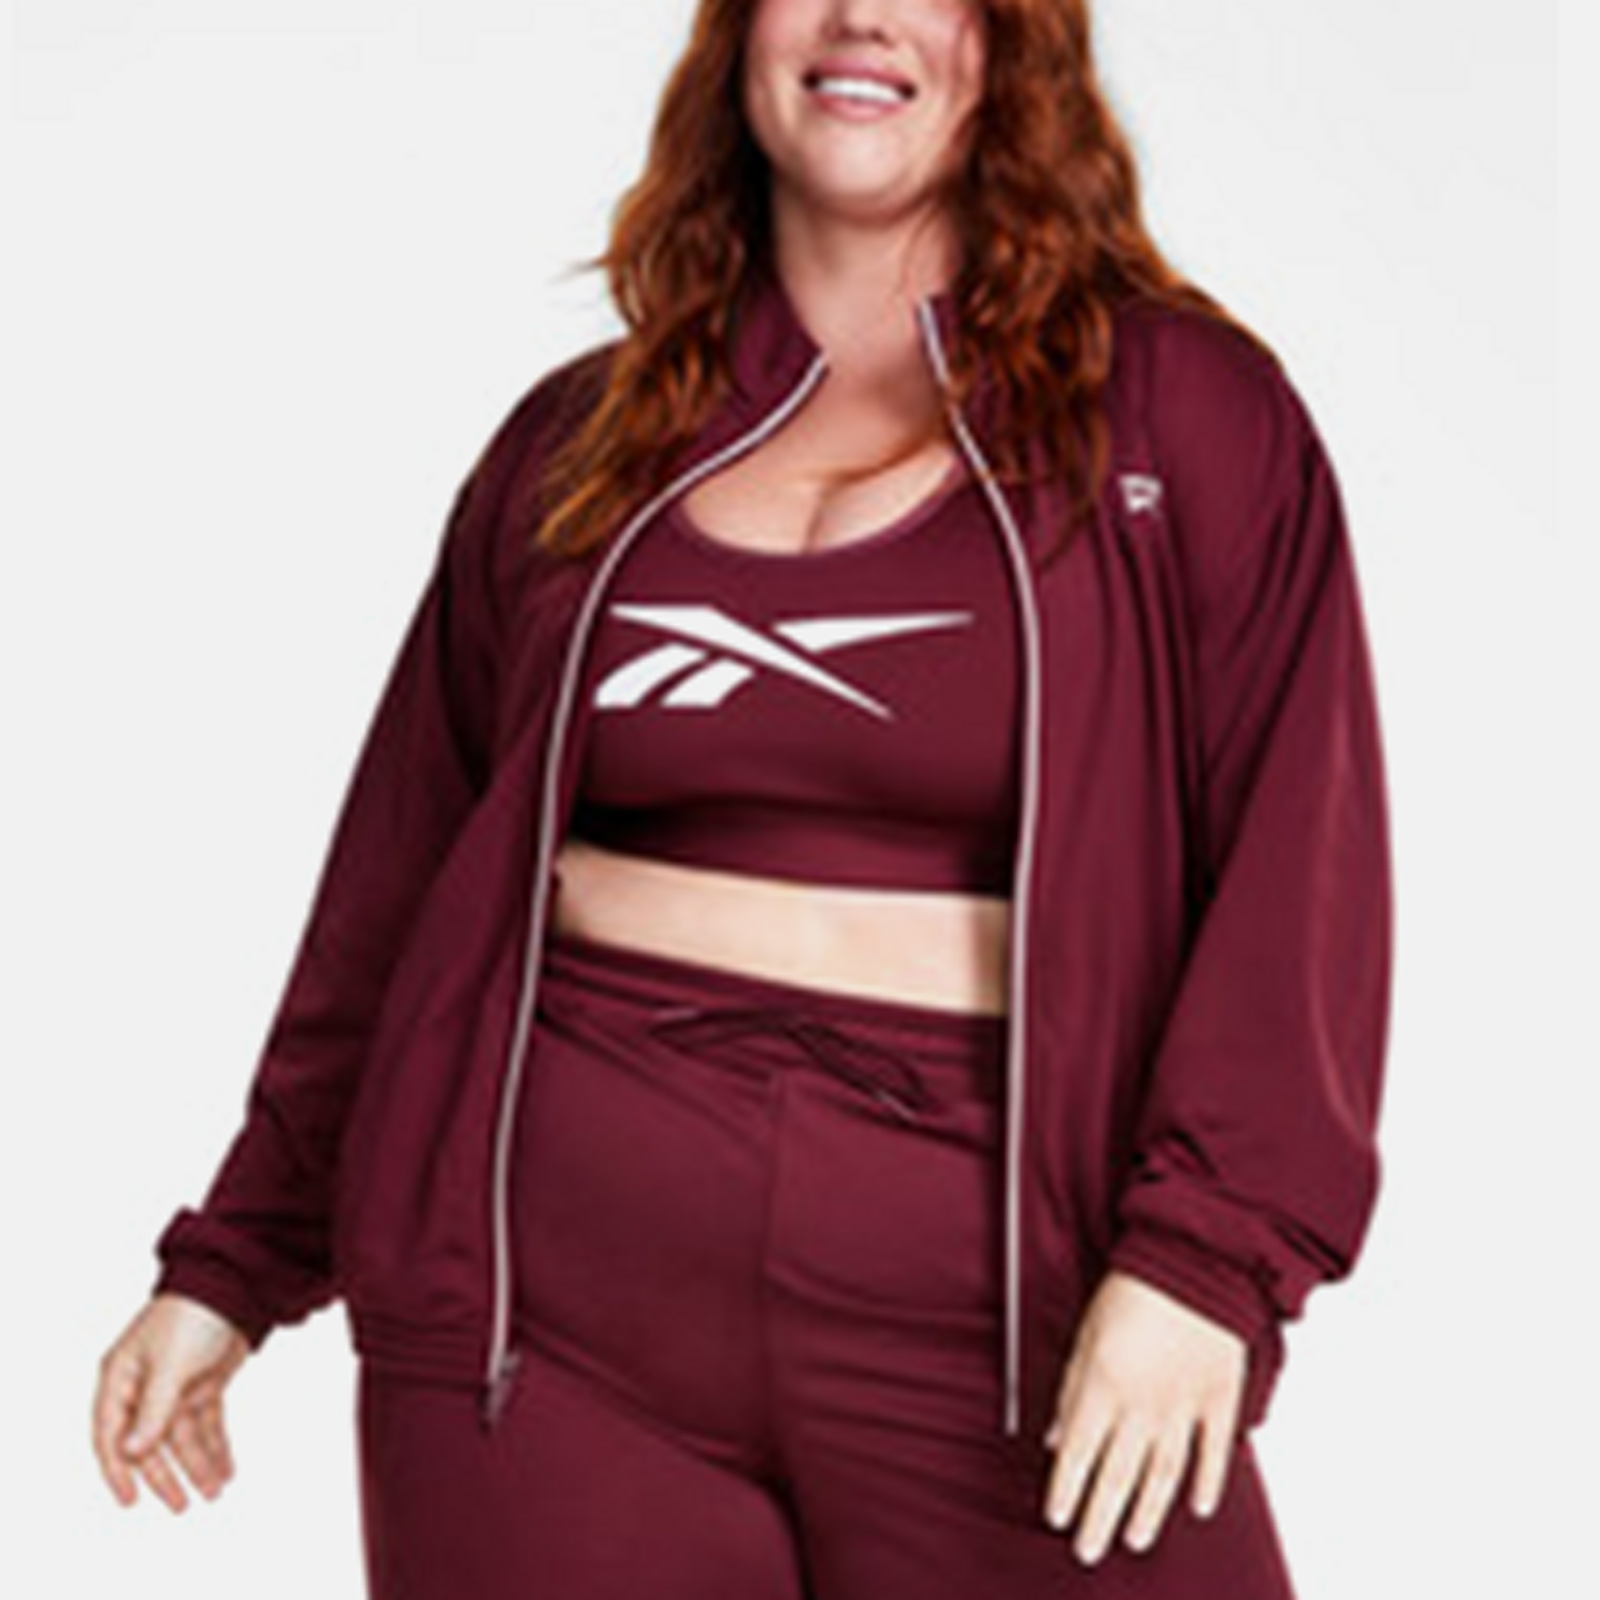 Full Zip Workout Clothes: Women's Activewear & Athletic Wear - Macy's